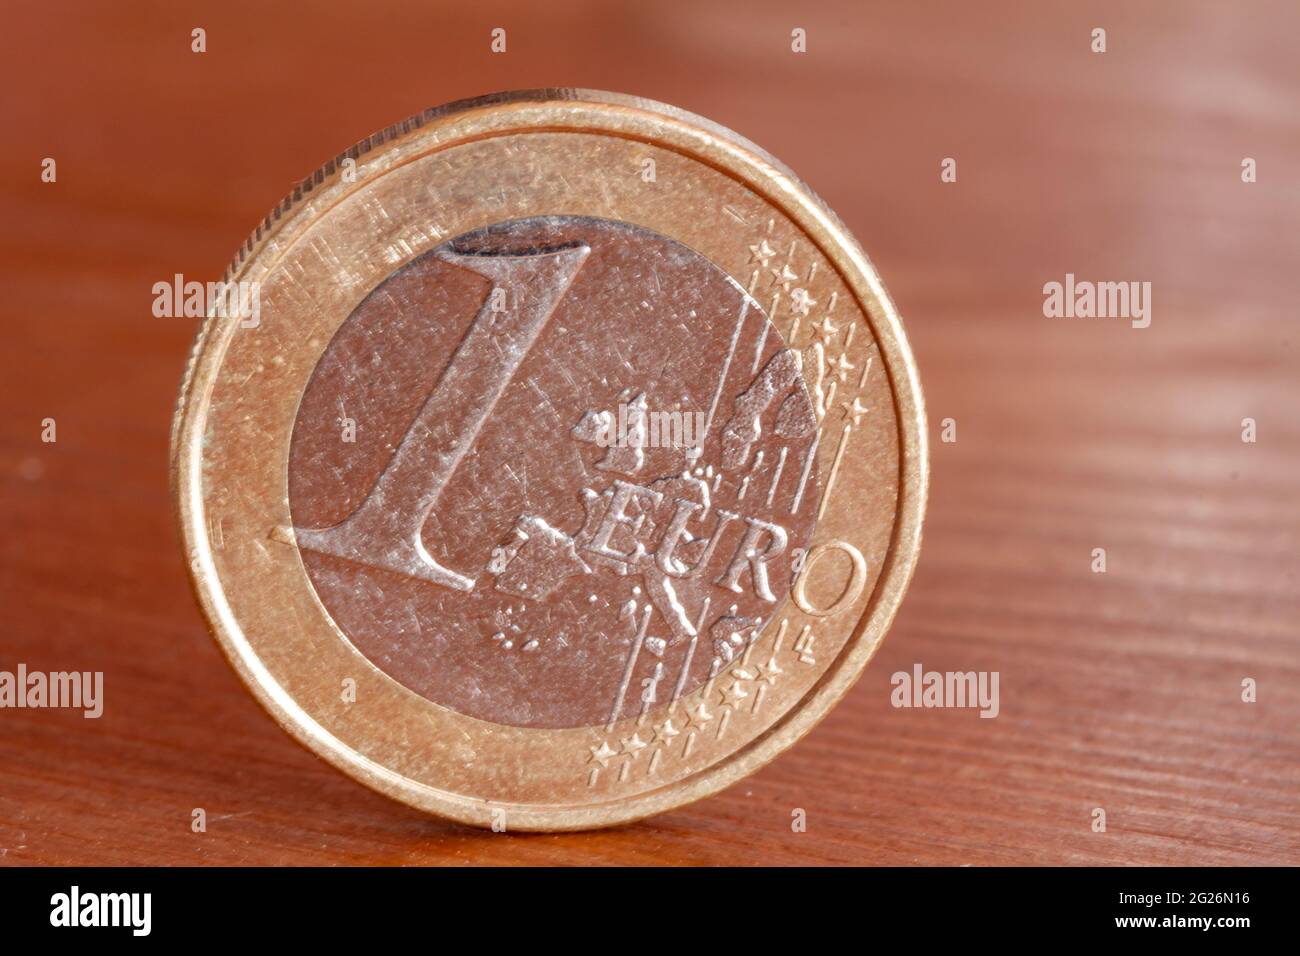 Eurocent on a wooden table Stock Photo